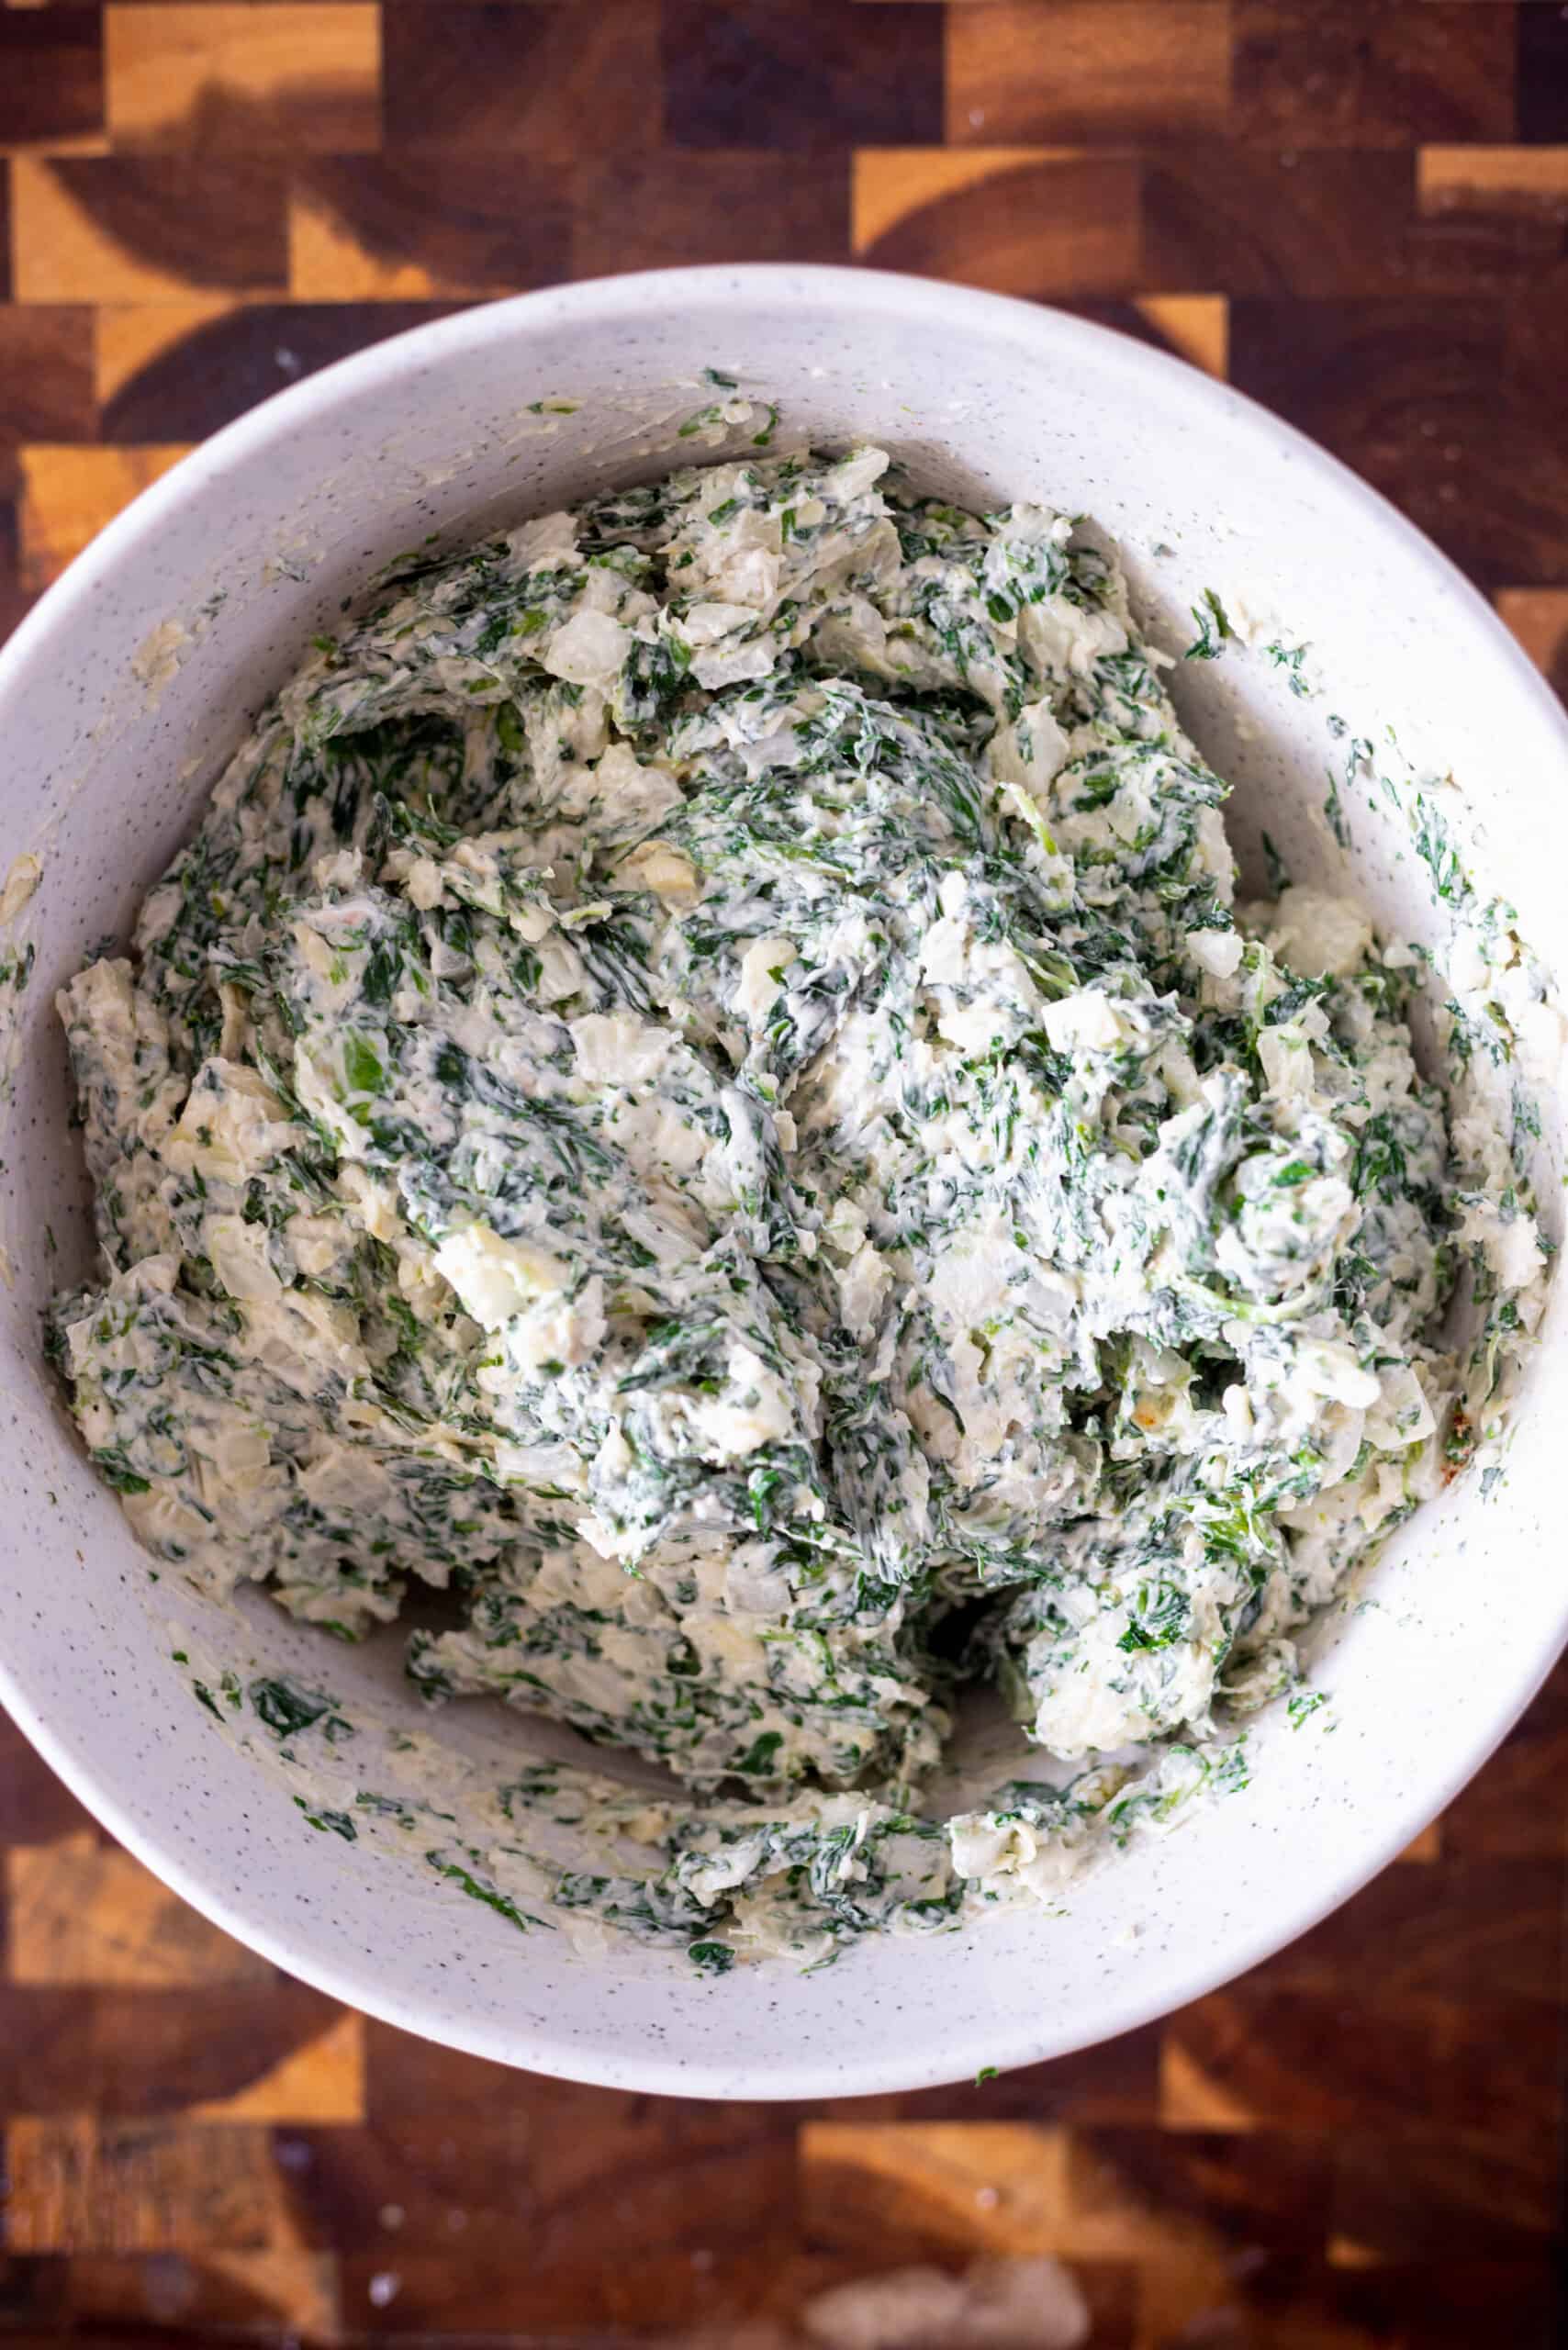 Ingredients for spinach dip mixed together